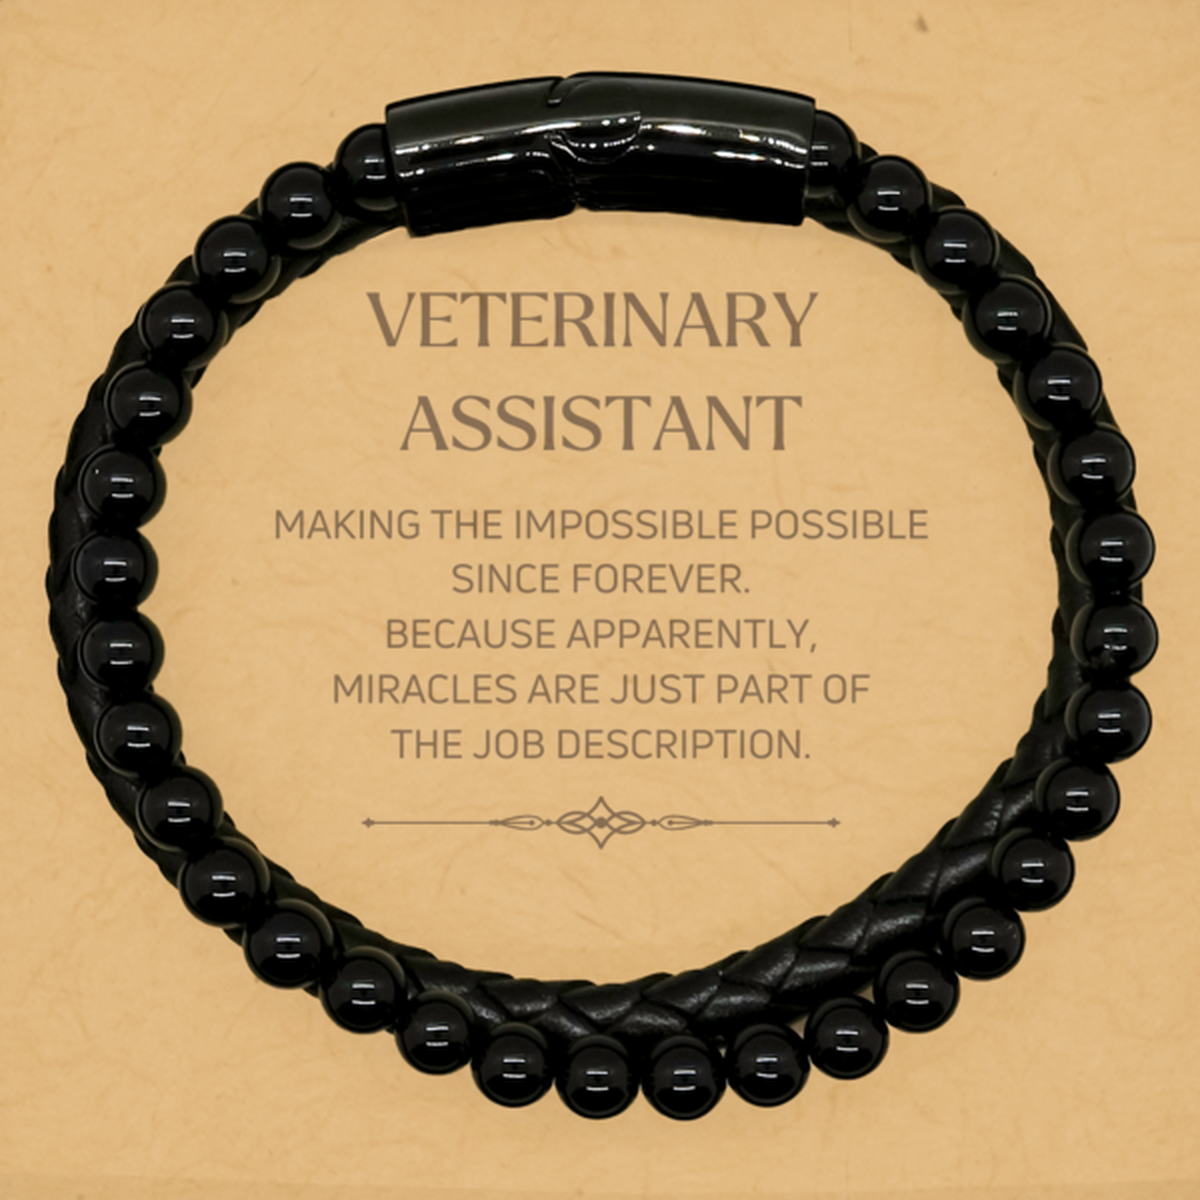 Funny Veterinary Assistant Gifts, Miracles are just part of the job description, Inspirational Birthday Stone Leather Bracelets For Veterinary Assistant, Men, Women, Coworkers, Friends, Boss